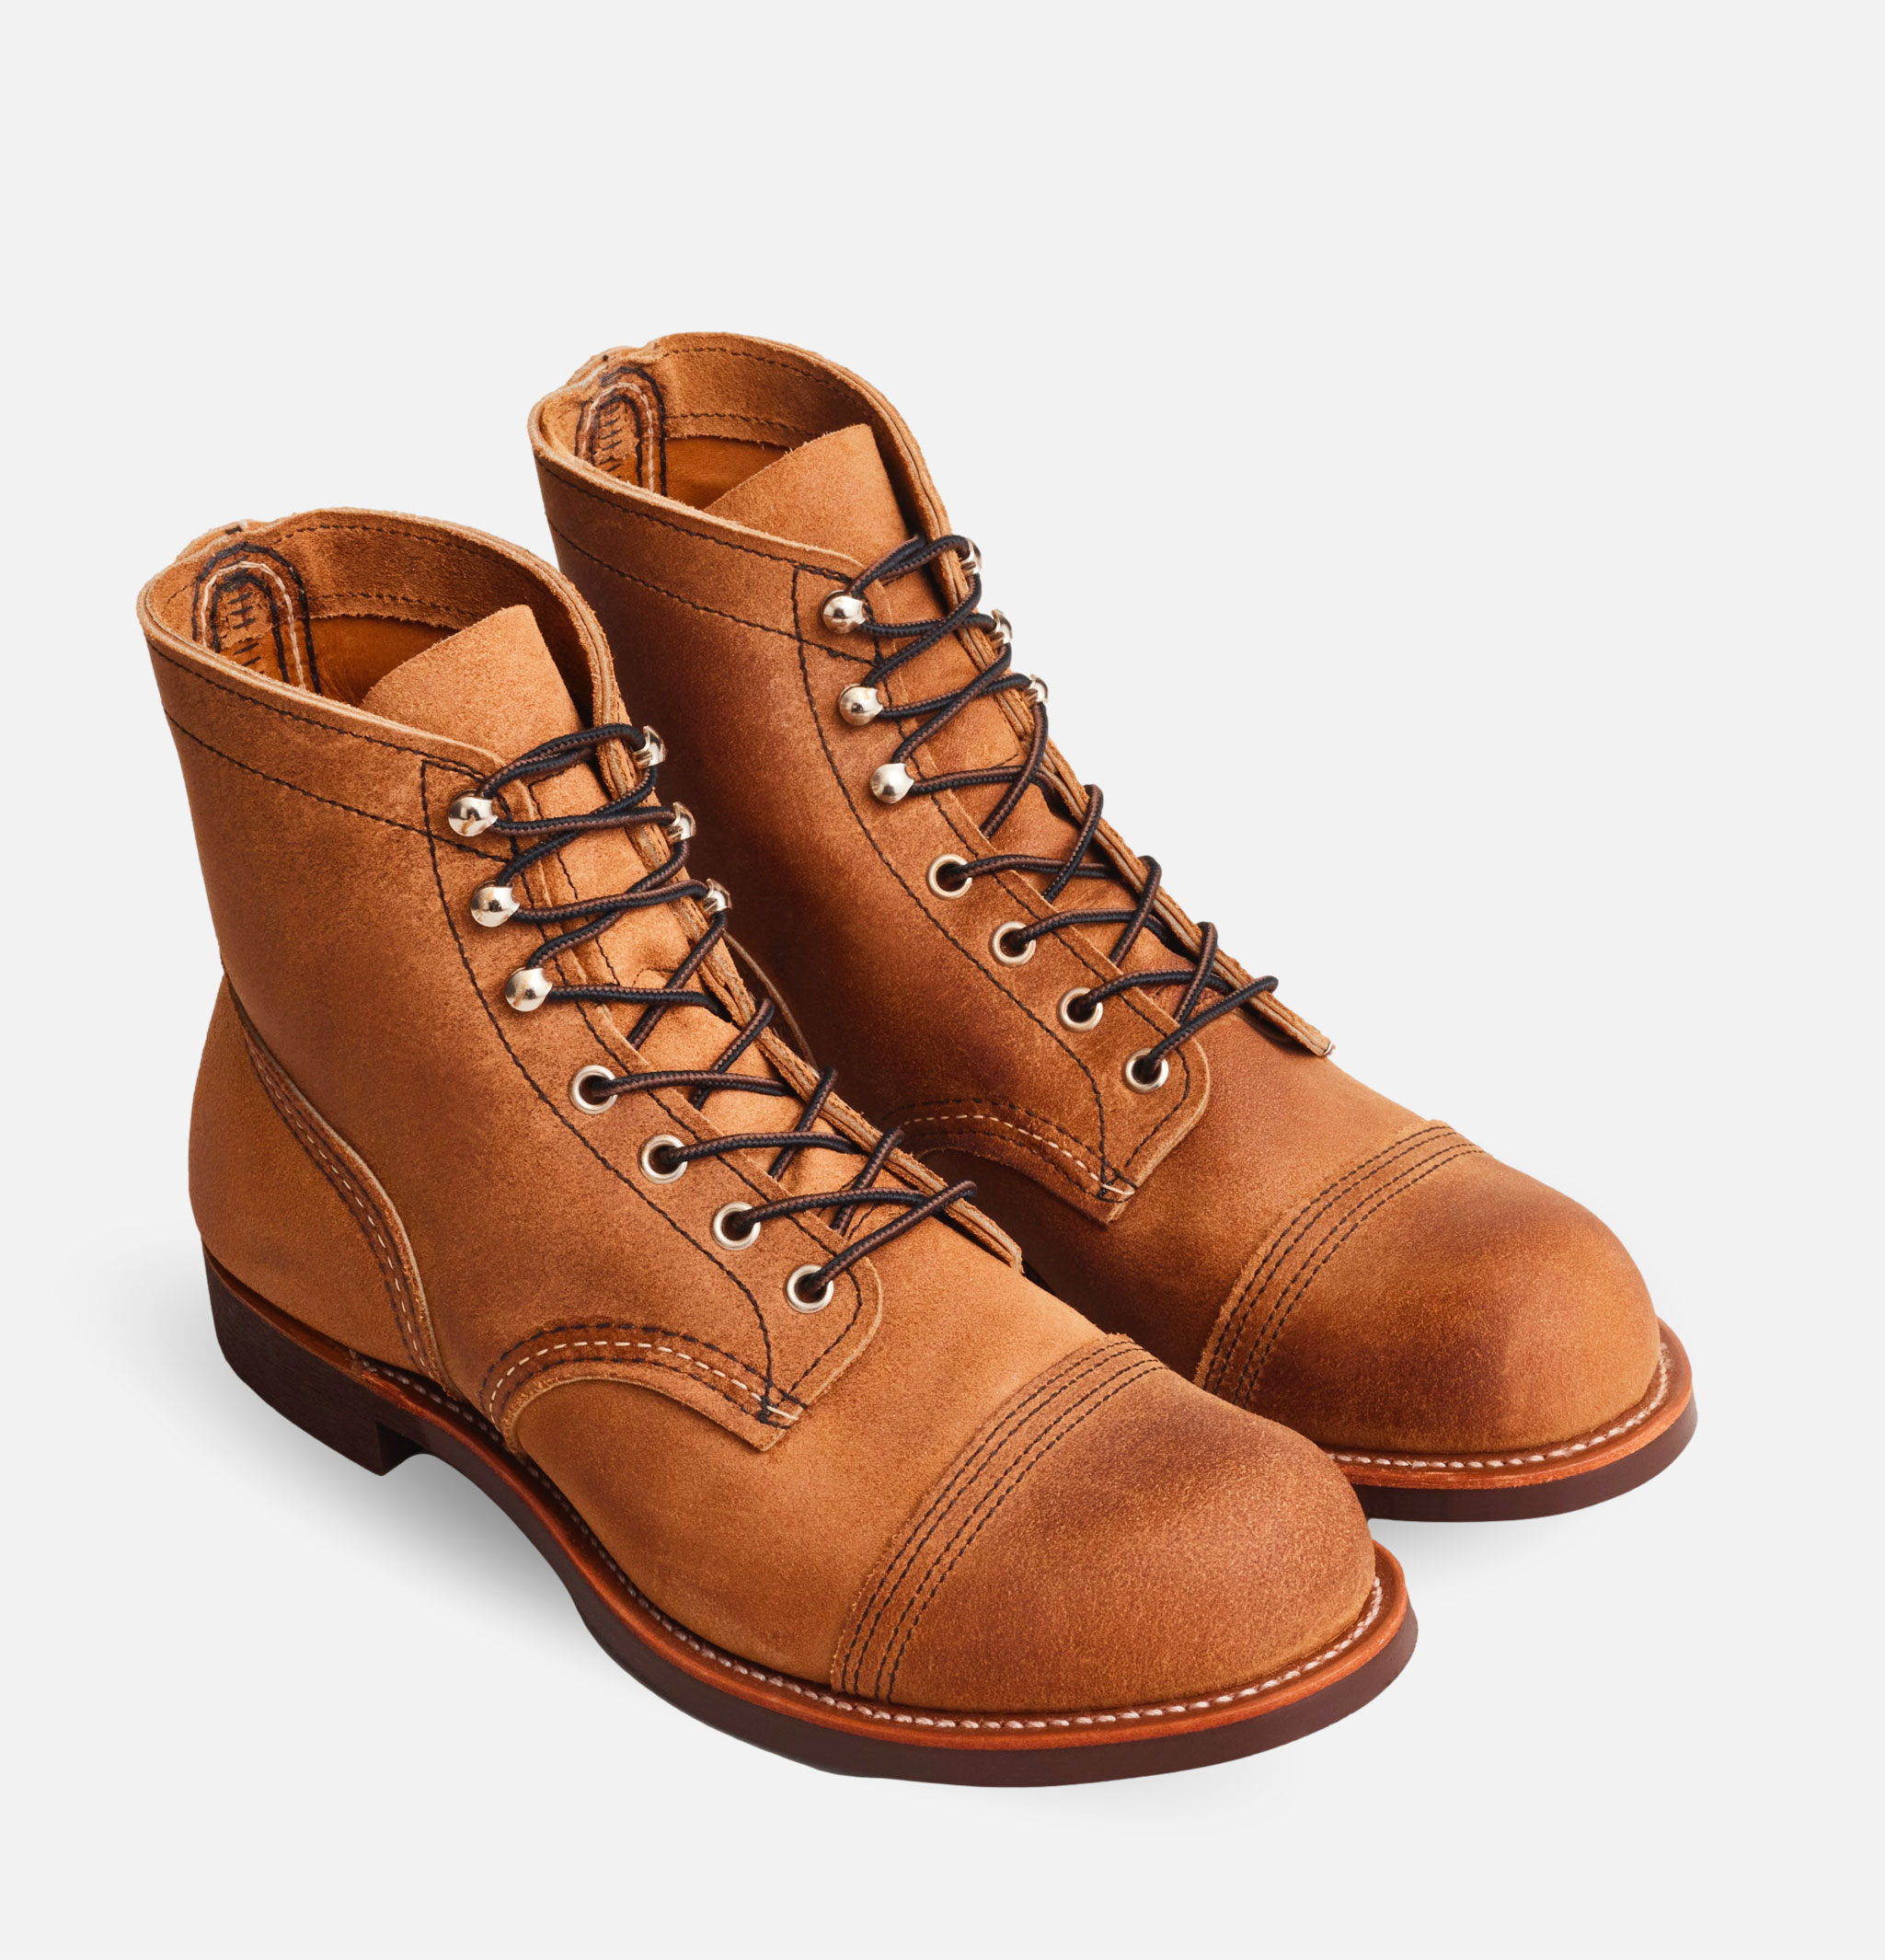 Red Wing Shoes - 8083 - Iron Ranger Hawthorne